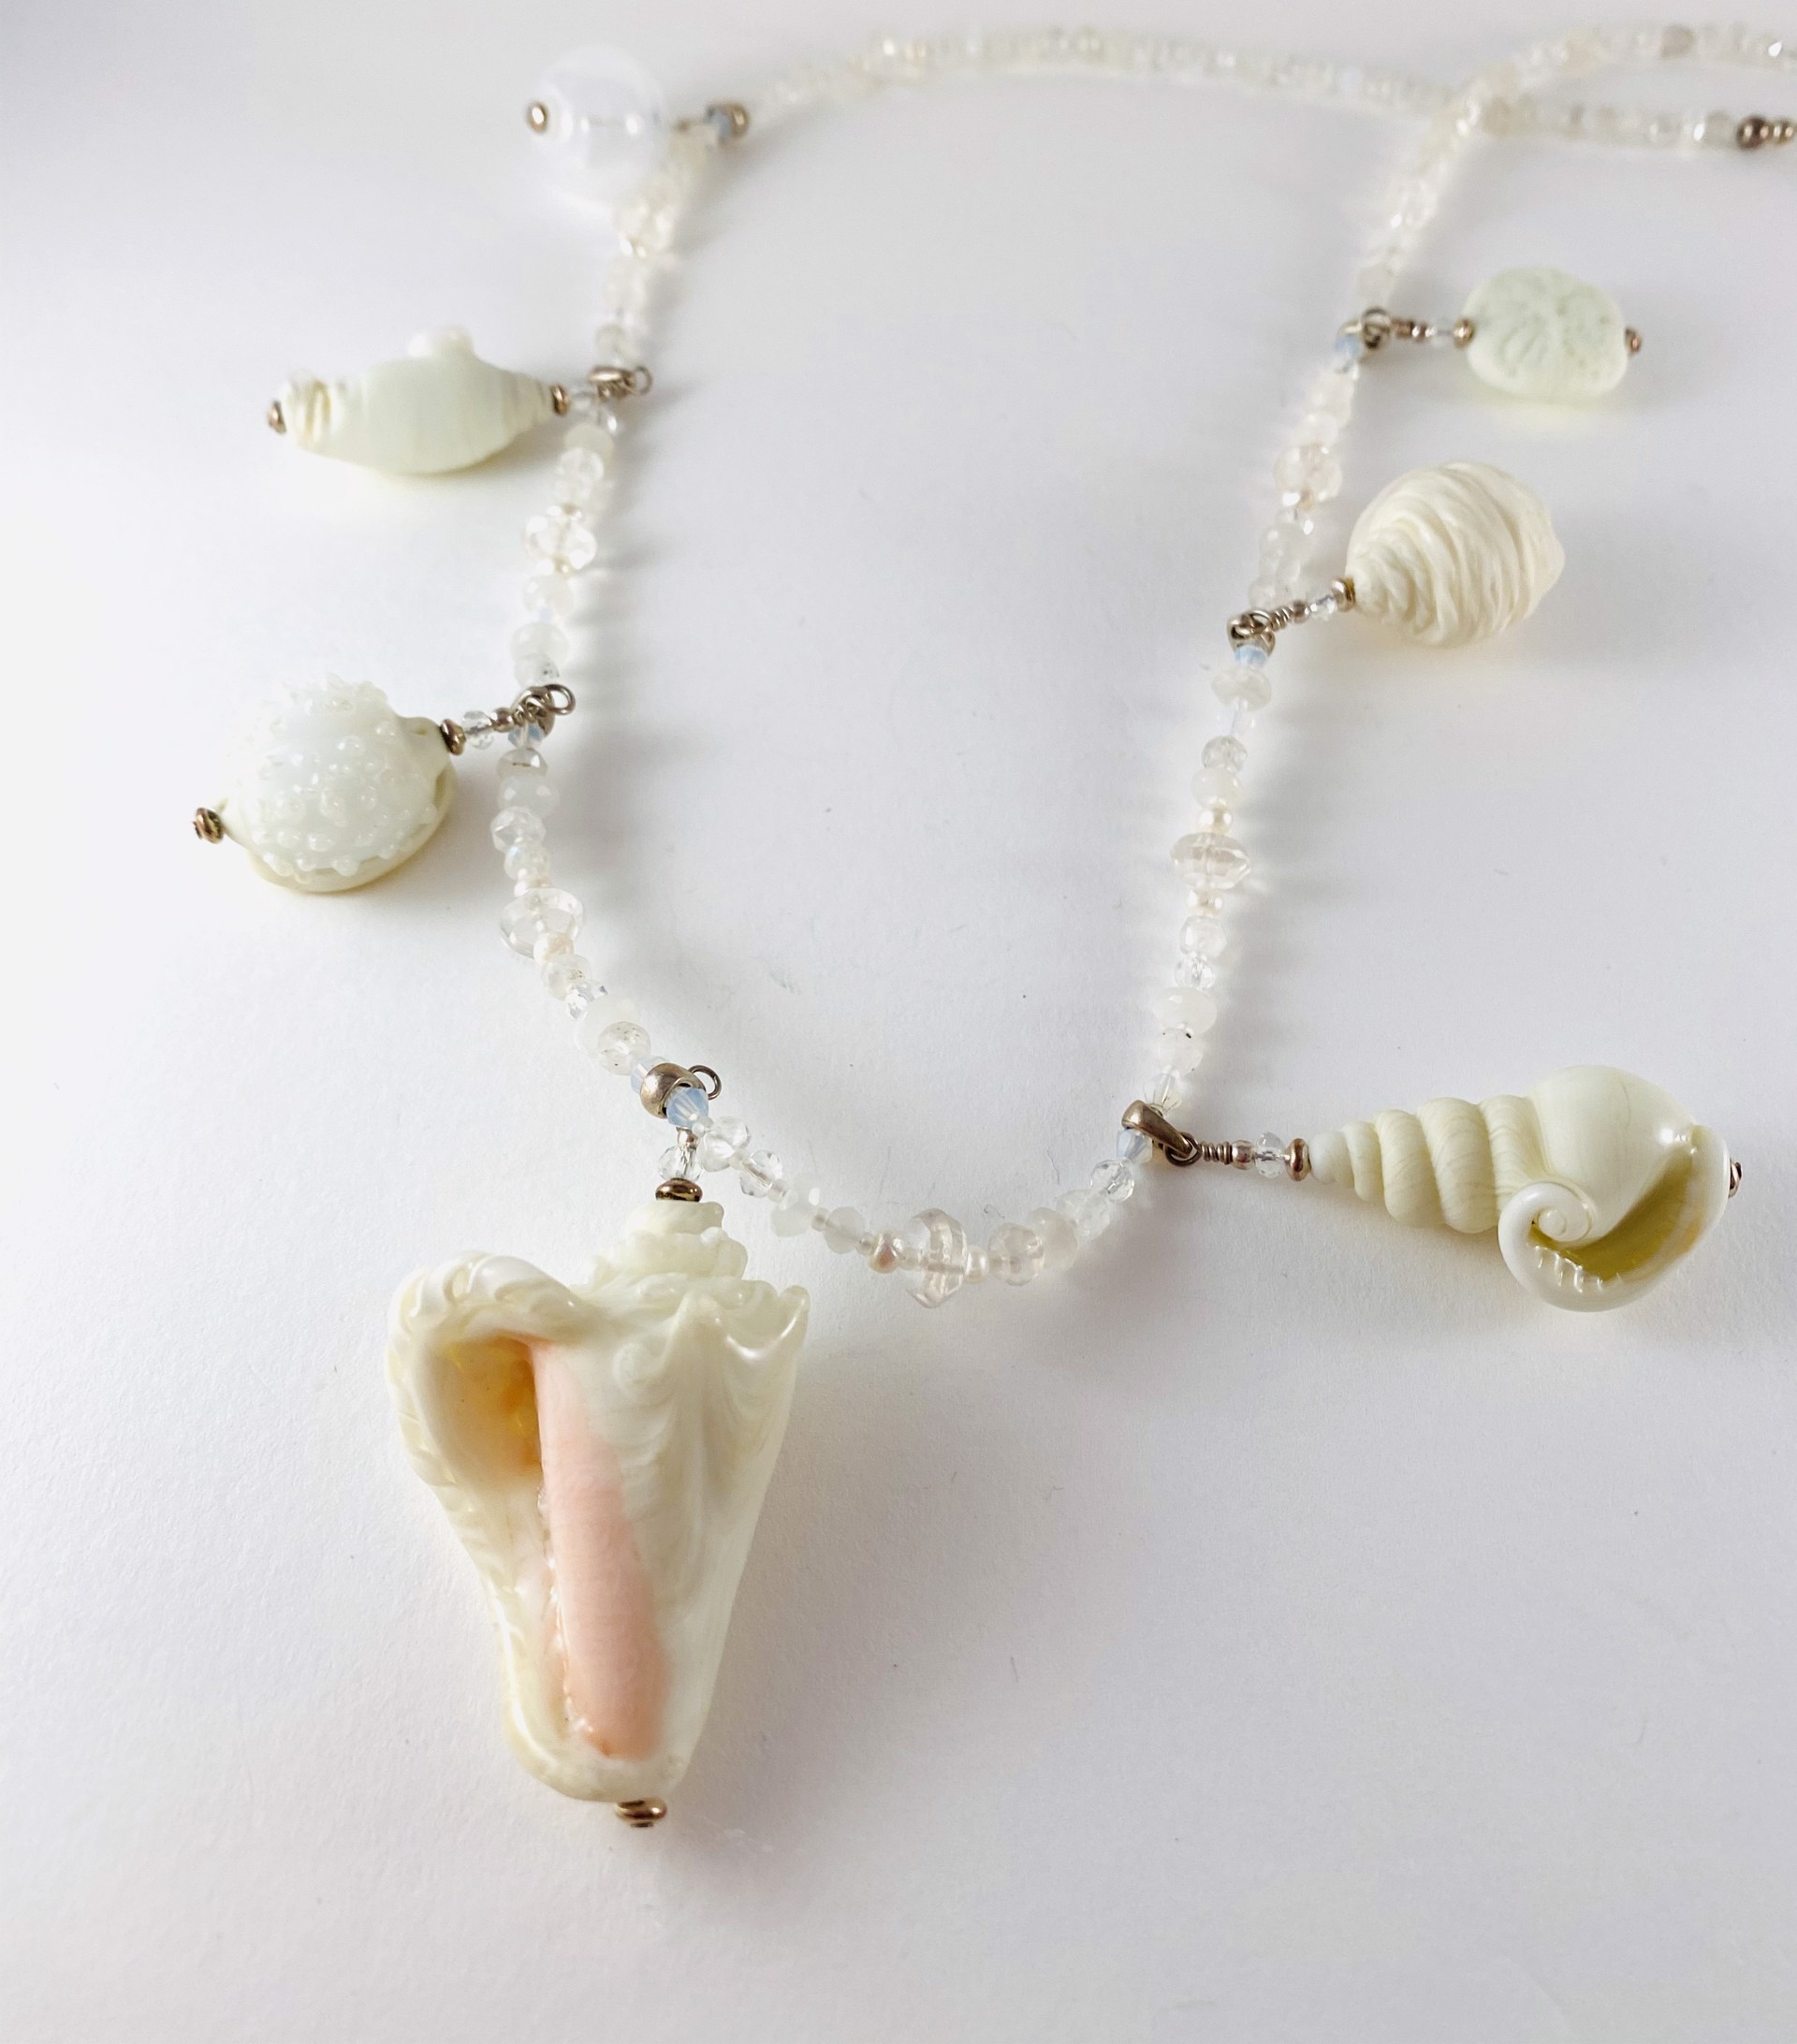 Ivory Shells, Moonstone, Crystal and Seed Pearl Necklace LS15-173 by Linda Sacra